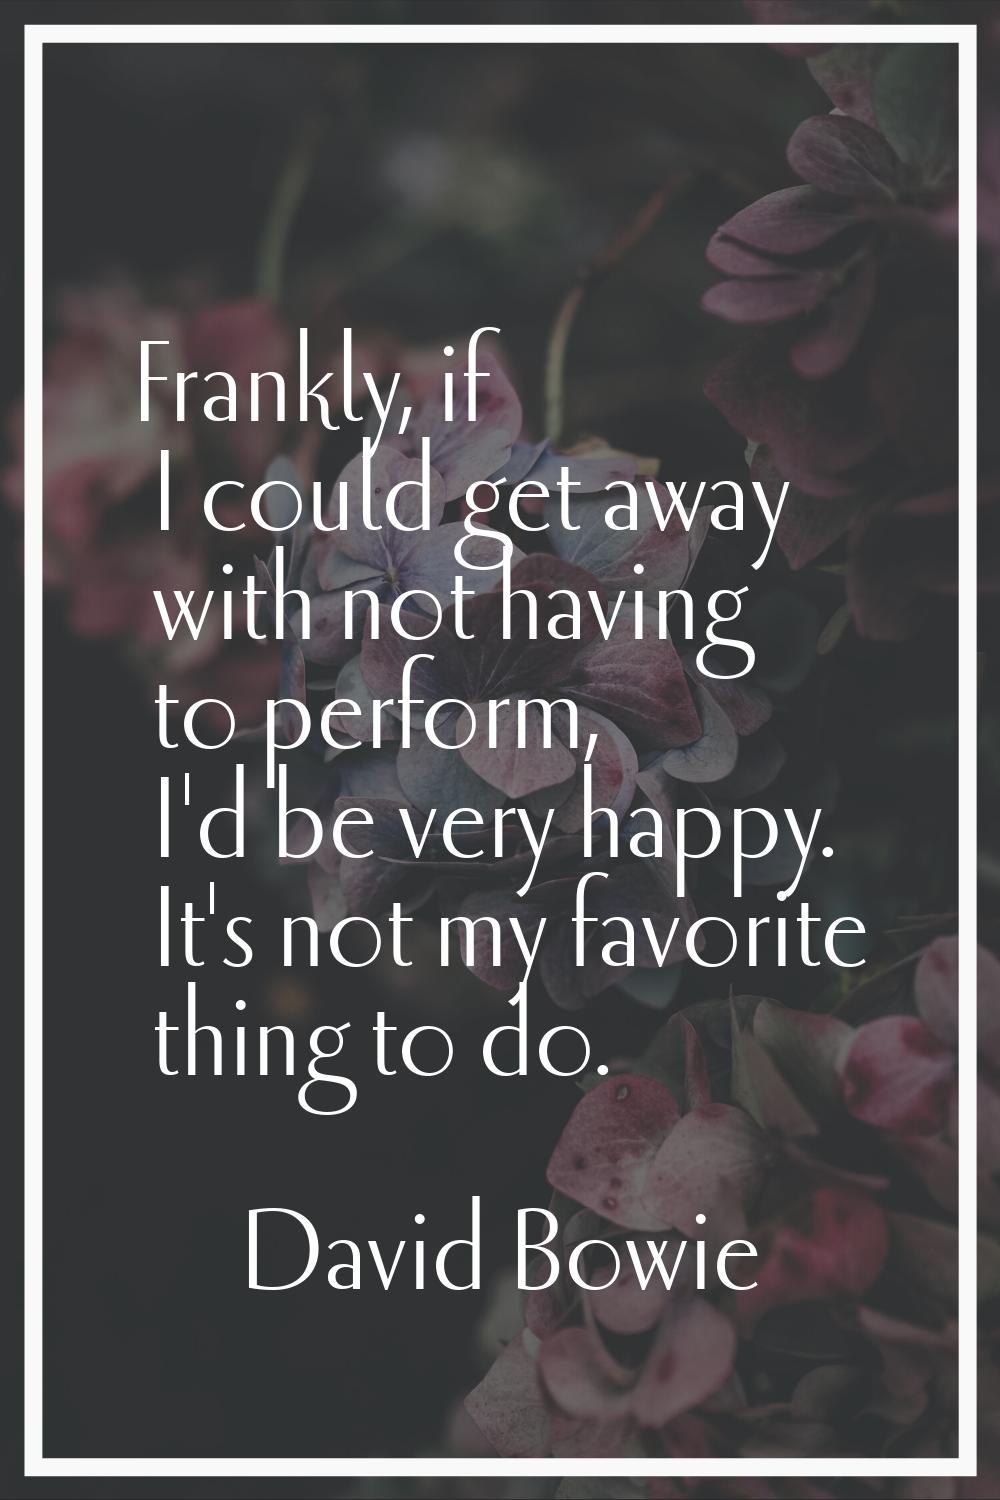 Frankly, if I could get away with not having to perform, I'd be very happy. It's not my favorite th